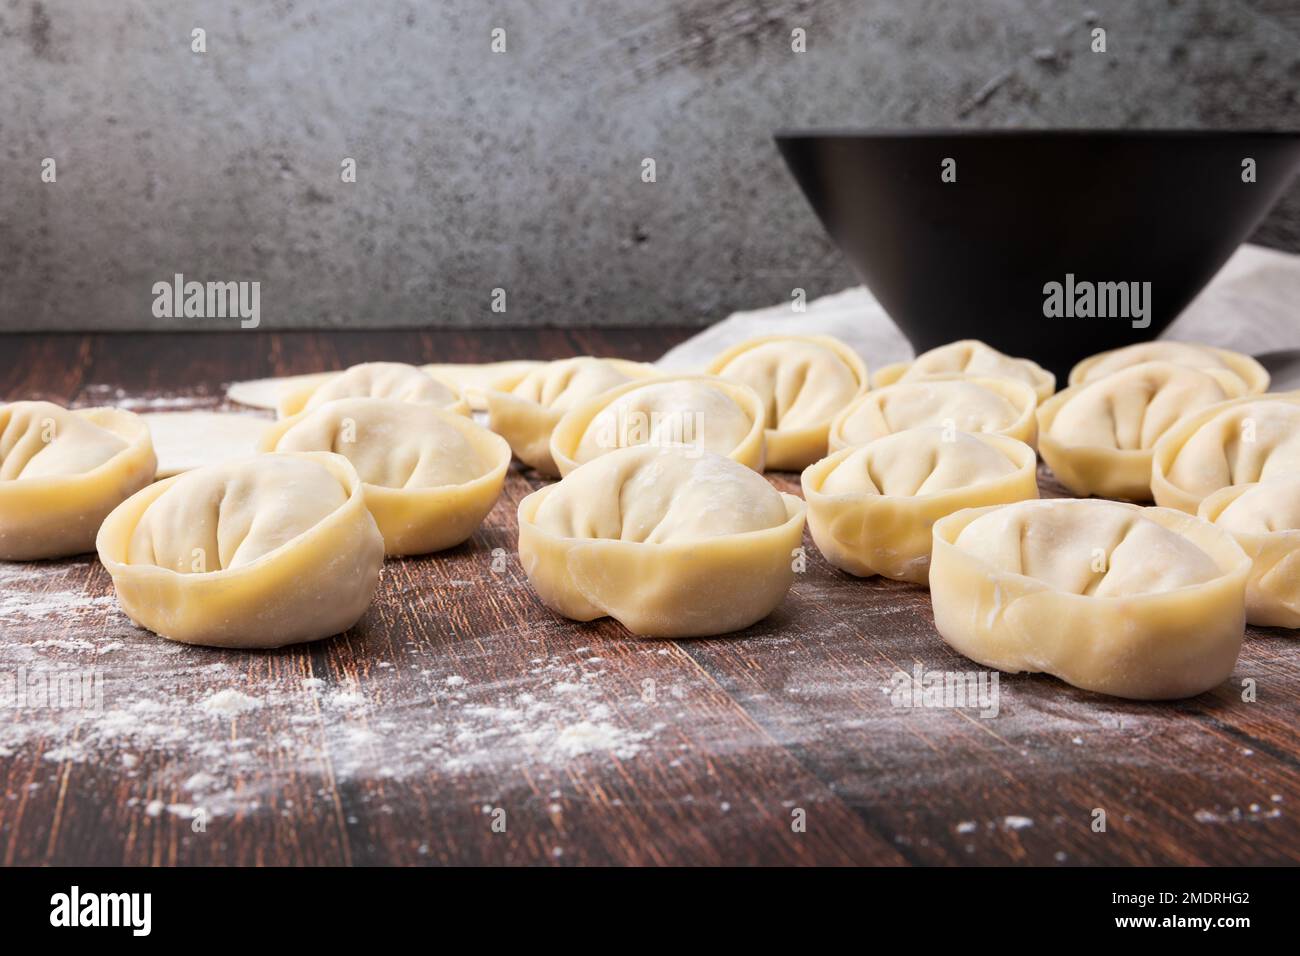 Korean homemade dumplings made from wheat flour. Close-up from the front. Stock Photo